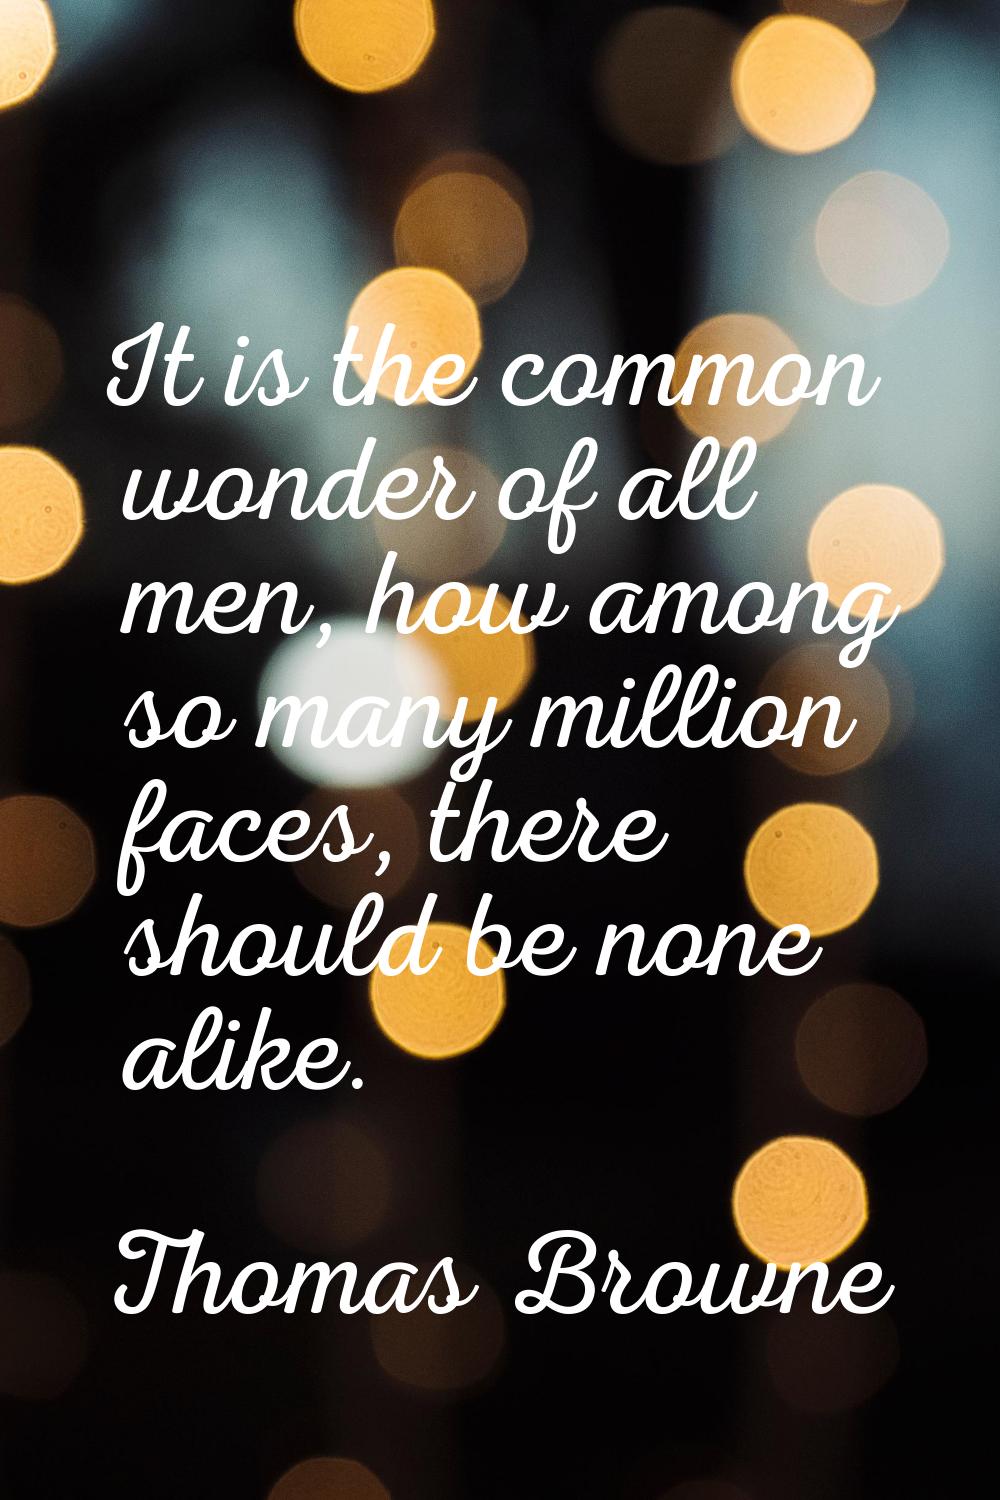 It is the common wonder of all men, how among so many million faces, there should be none alike.